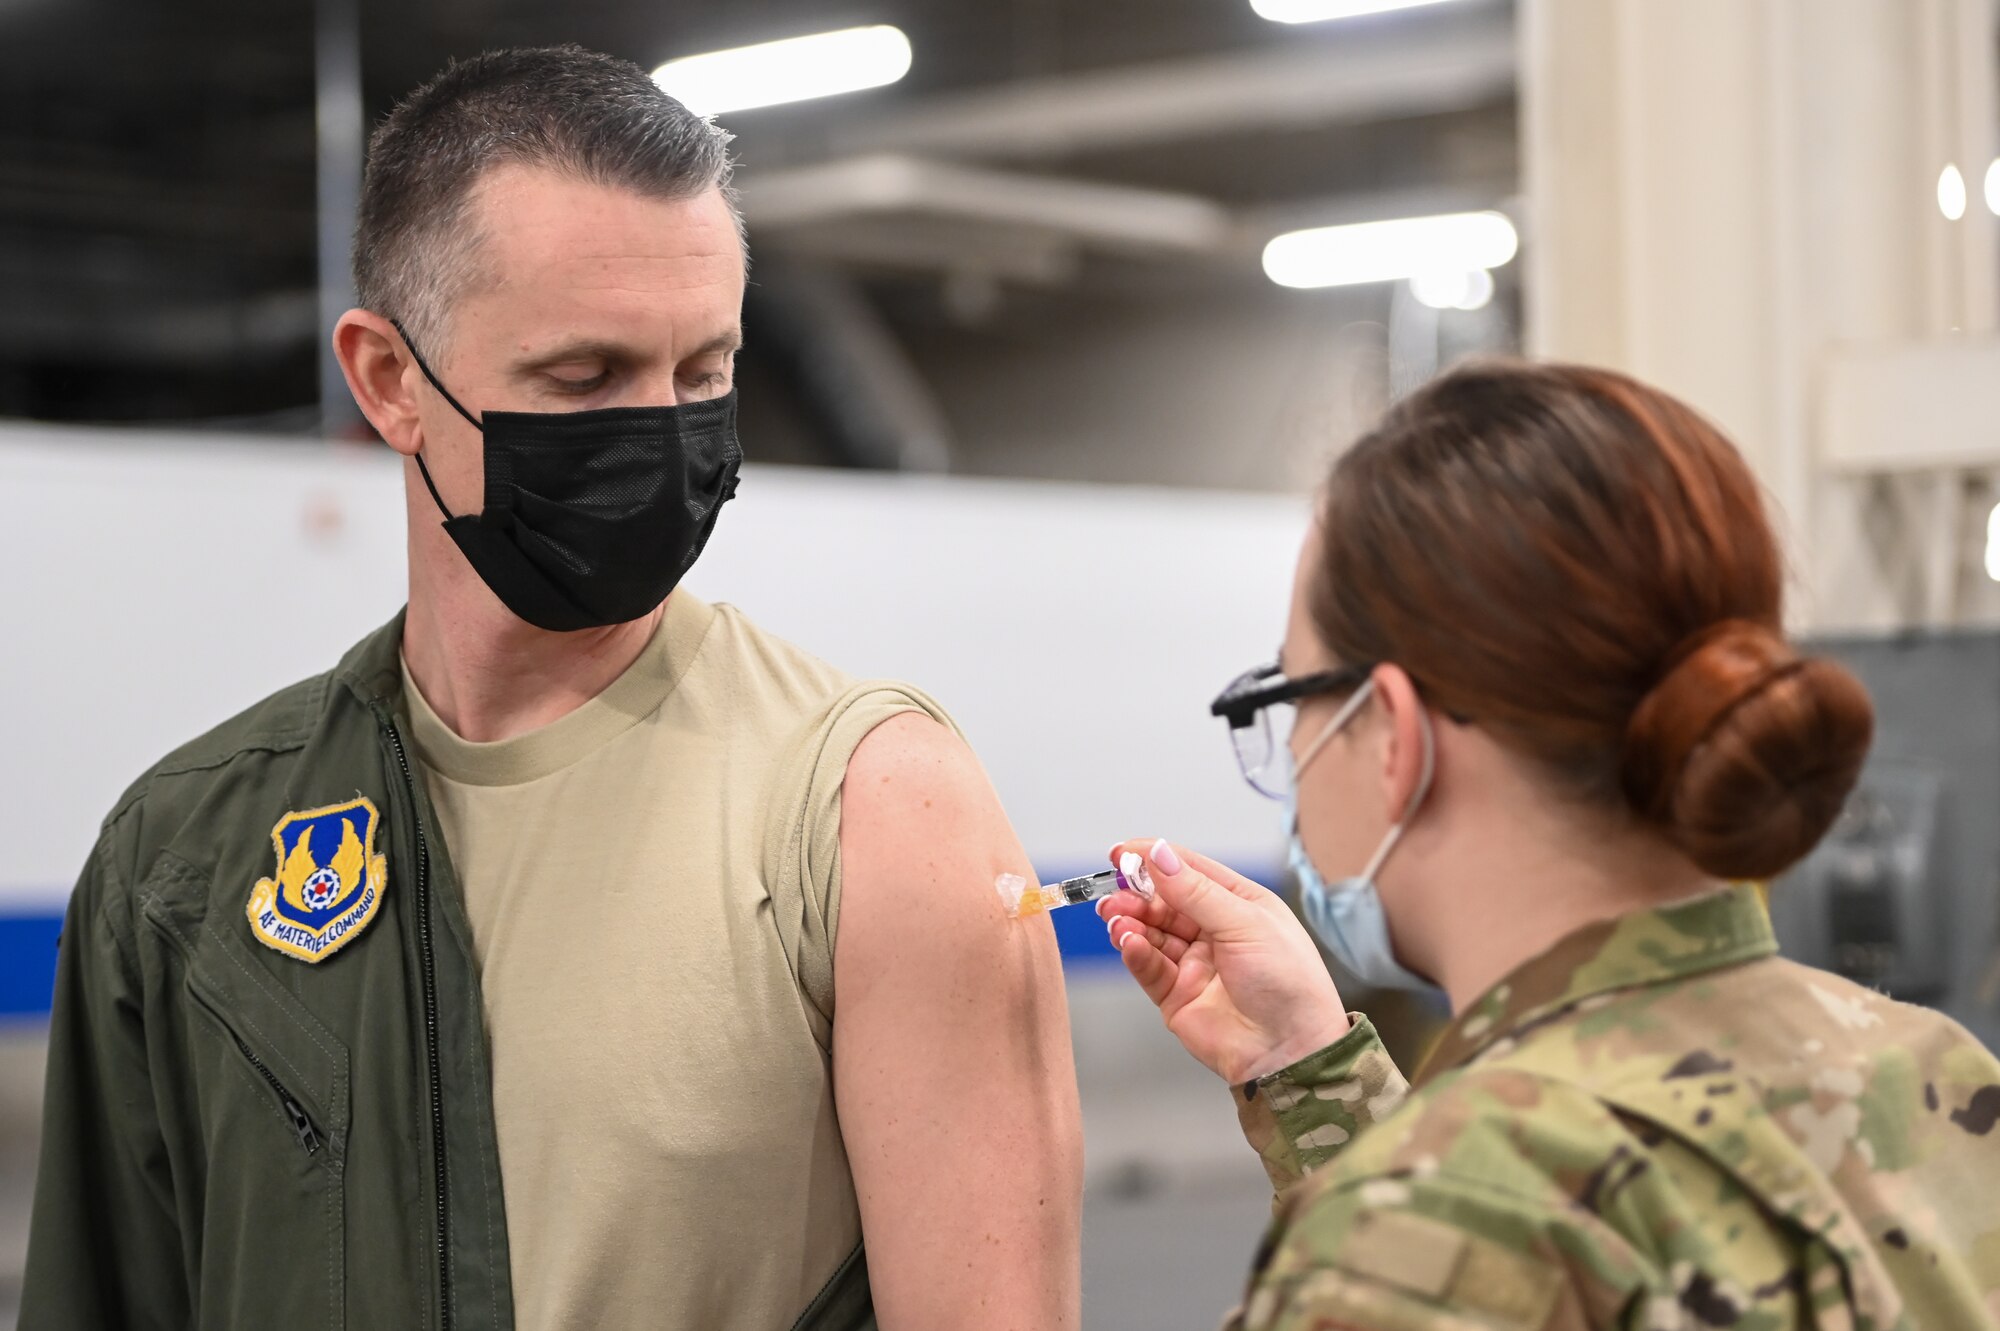 Lt. Col. David Isaksen, Ogden Air Logistics Complex, receives a flu vaccination shot Dec. 17, 2020, at Hill Air Force Base, Utah, from Airman 1st Class Sofia Fitzgerald, 75th Medical Group. The CDC recommends seasonal influenza vaccine for all people 6 months of age and older. The best way to prevent seasonal flu is to get vaccinated every year. (U.S. Air Force photo by Cynthia Griggs)